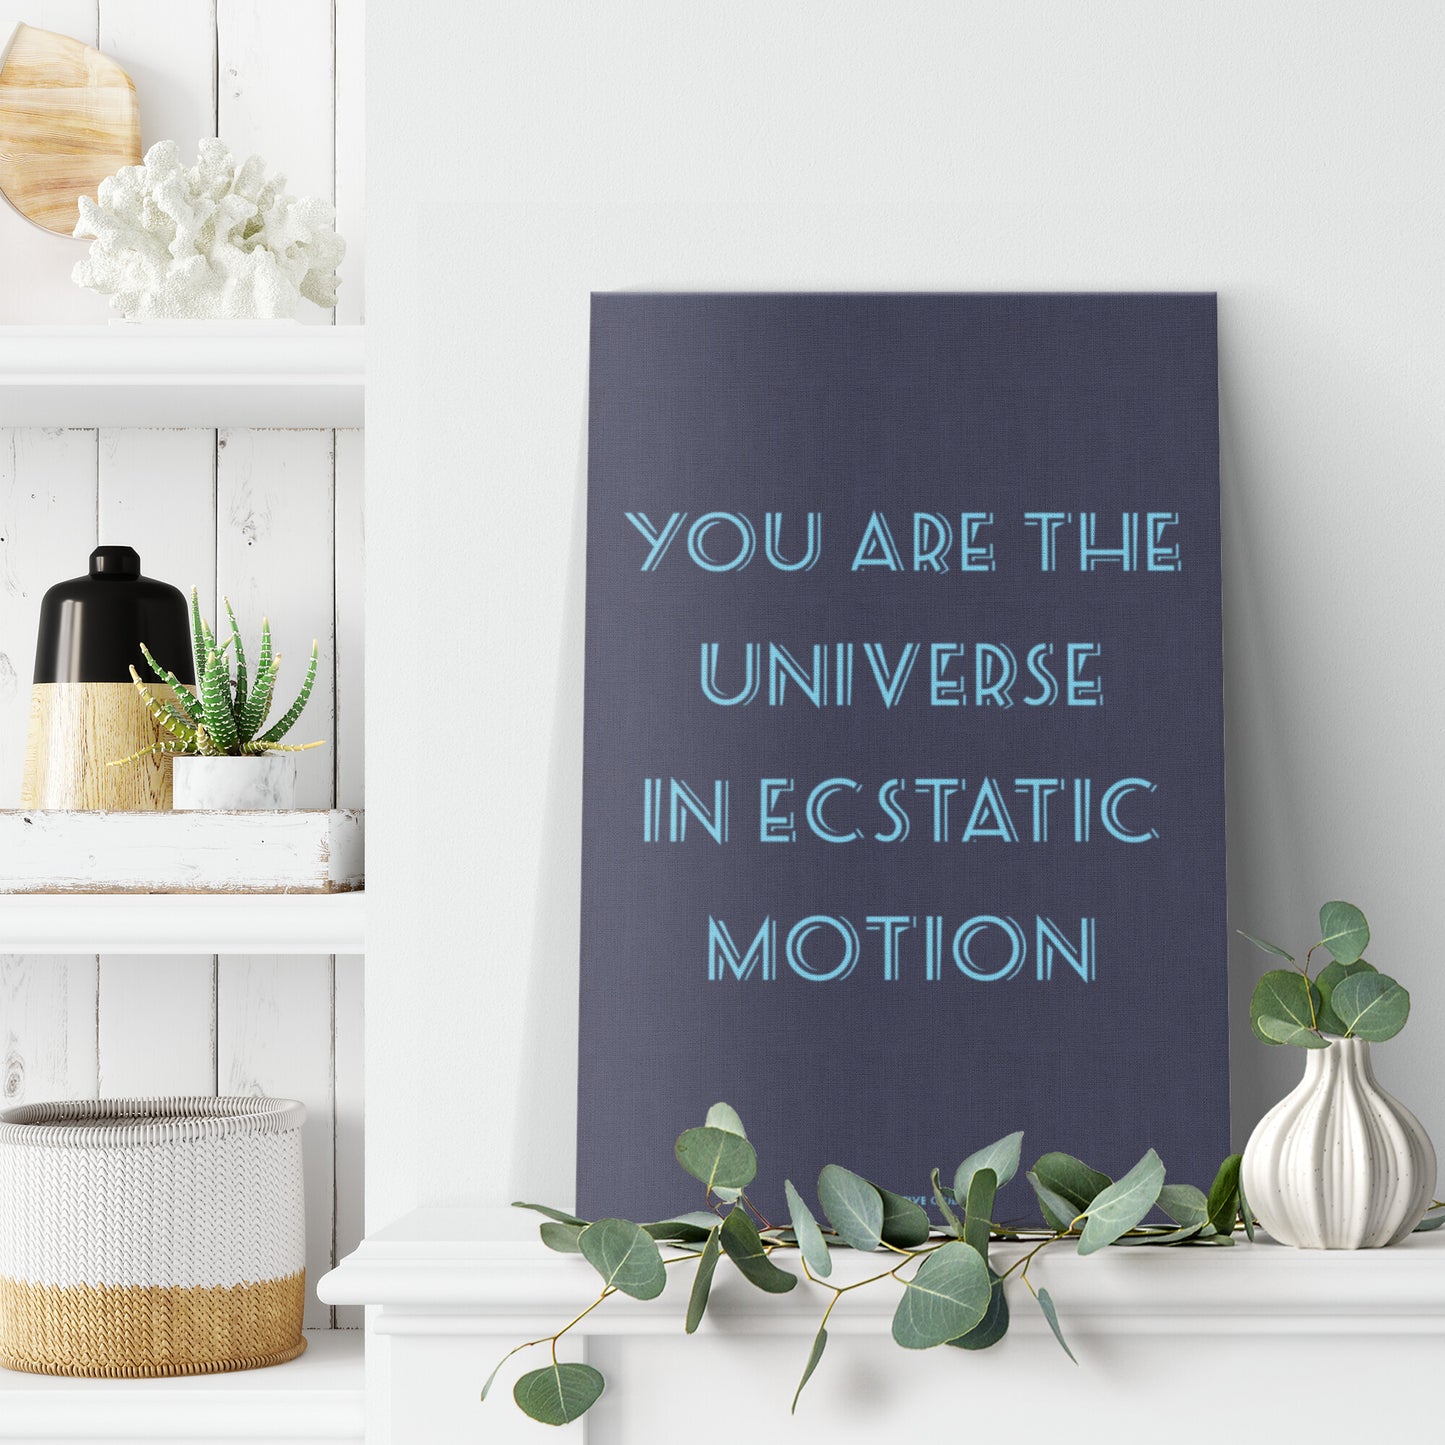 YOU ARE THE UNIVERSE IN ECSTATIC MOTION